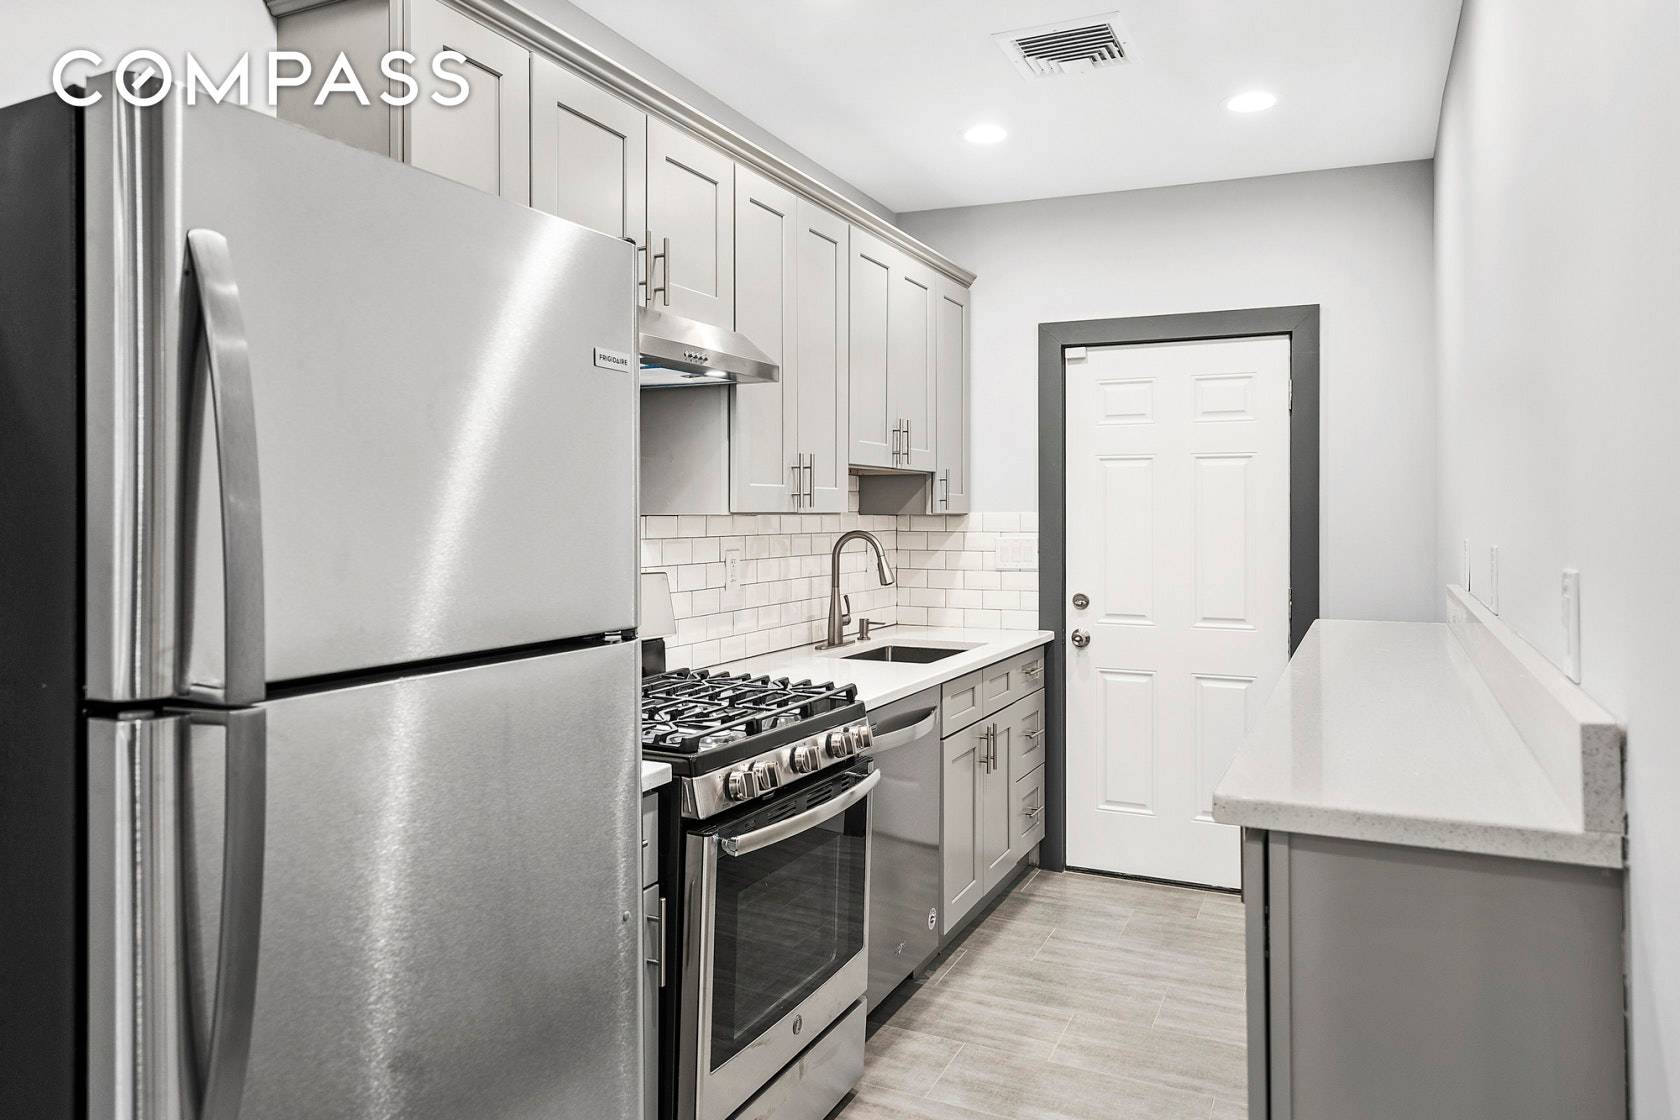 Newly Renovated Three Bedroom Home Office Row House in Bedford Stuyvesant for Rent INCENTIVE NO FEE CYOF Sunny and Spacious Newly renovated One Family Row House in Bedford Stuyvesant.